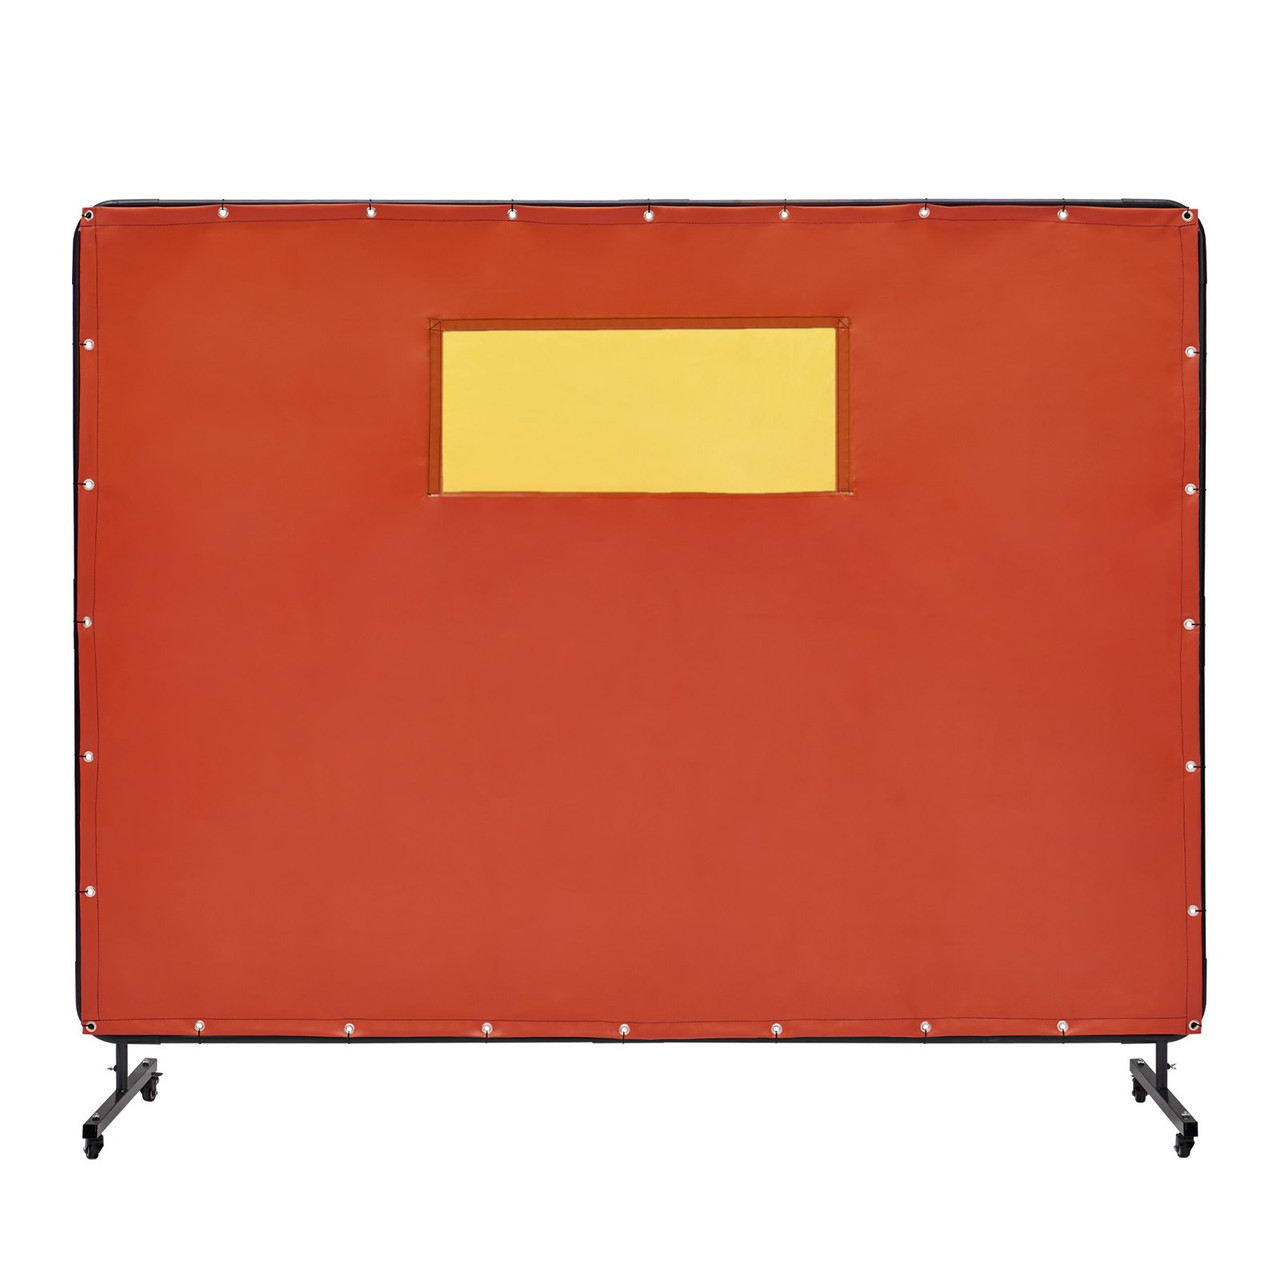 VEVOR Welding Screen with Frame, 6' x 8' Welding Curtain Screens, Flame-Resistant Vinyl Welding Protection Screen with 4 Swivel Wheels (2 Lockable) & Transparent Window for Workshop/Industrial, Red